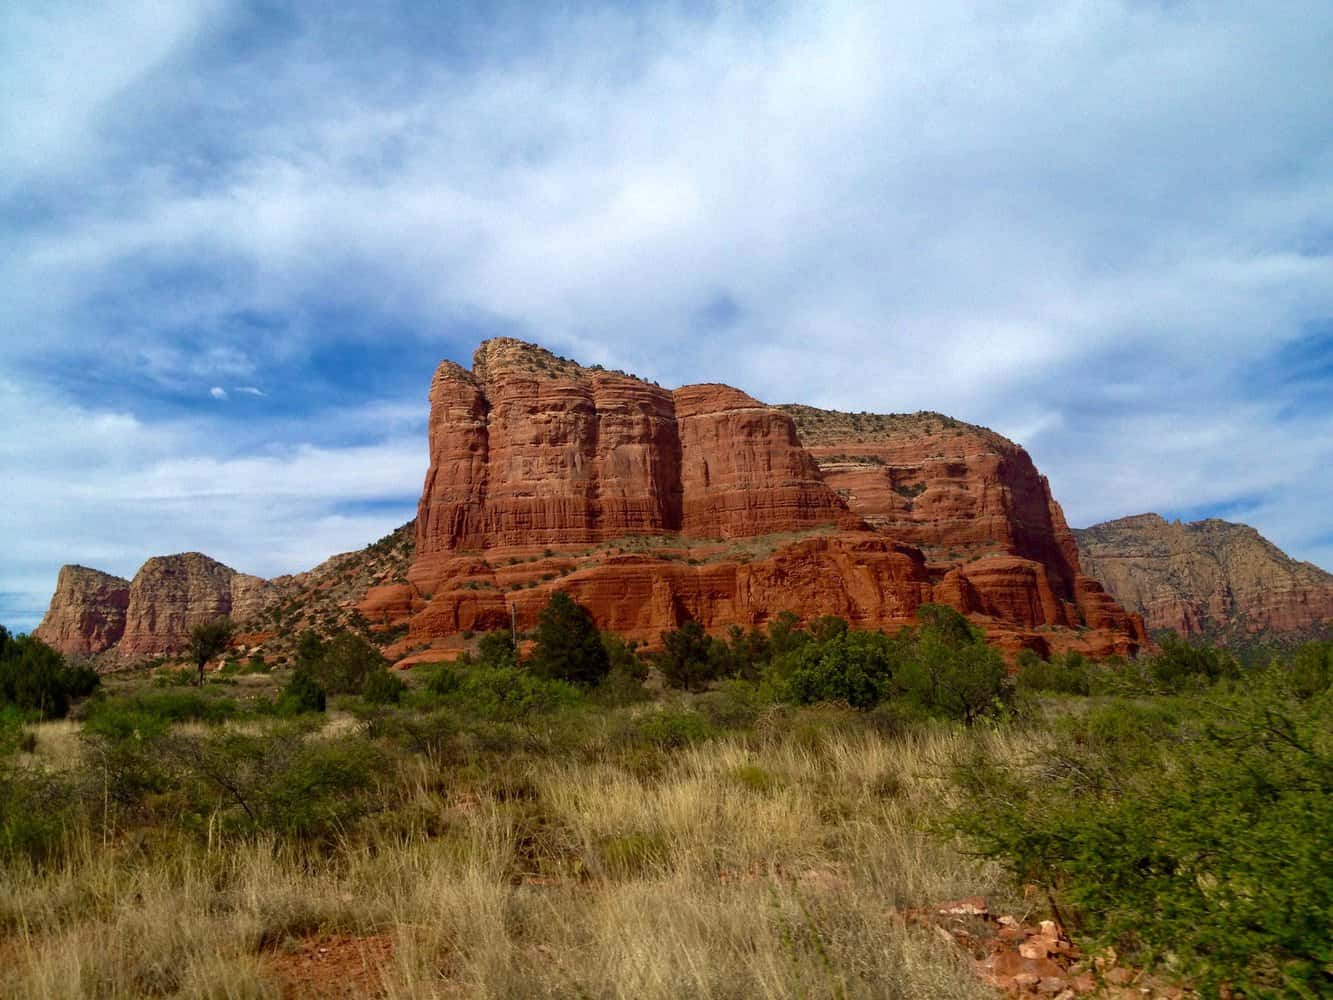 the courthouse butte in sedona arizona. ONE OF THE MOST Spiritual places in arizona